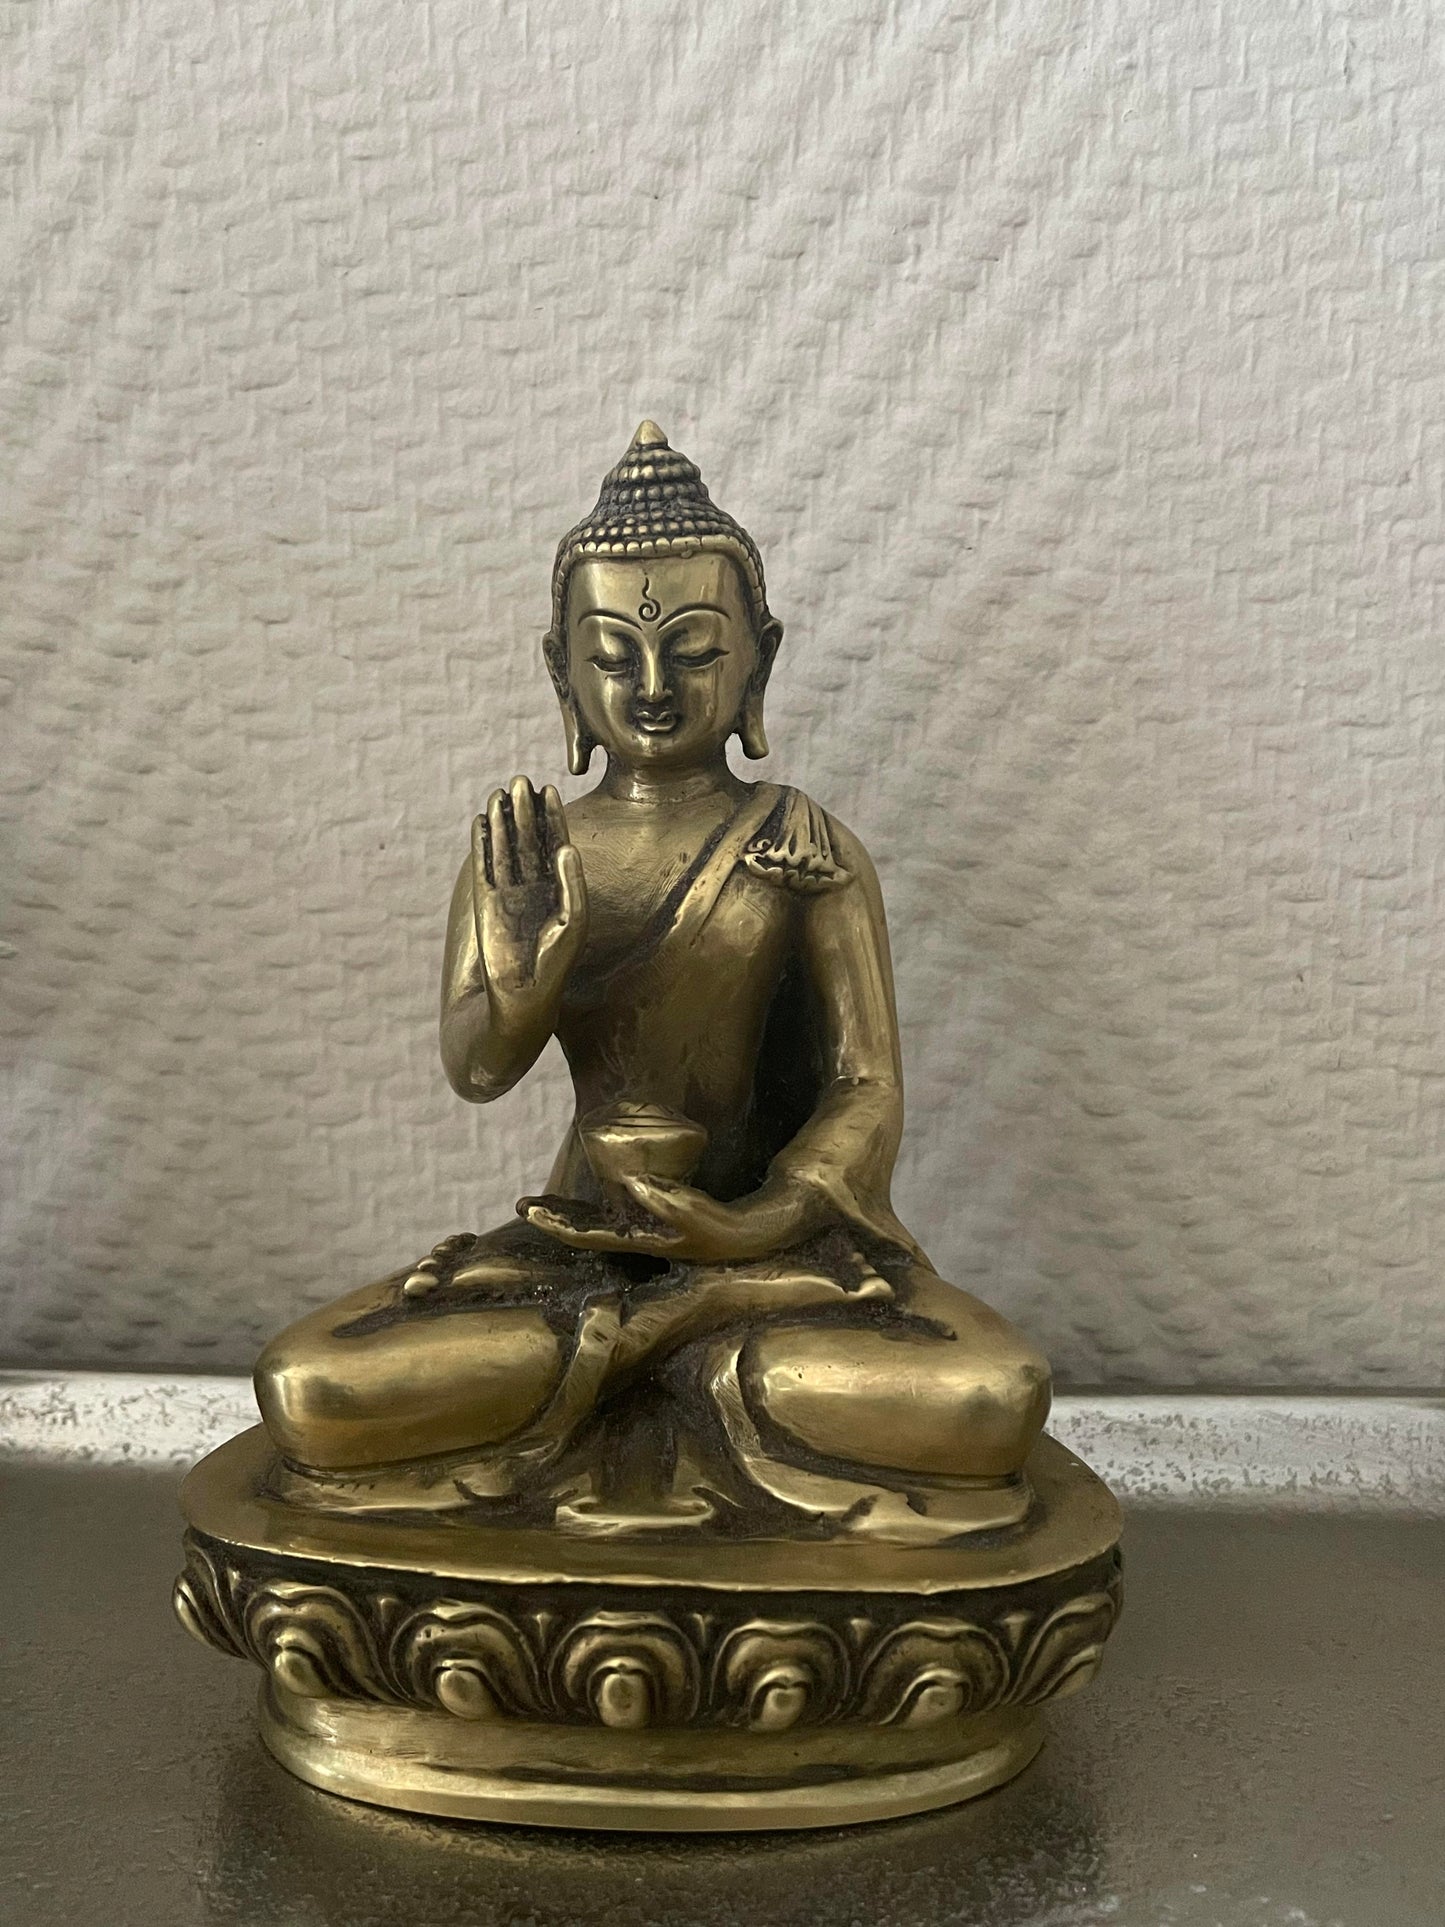 Antique finished Enlightened Lord Buddha Statue